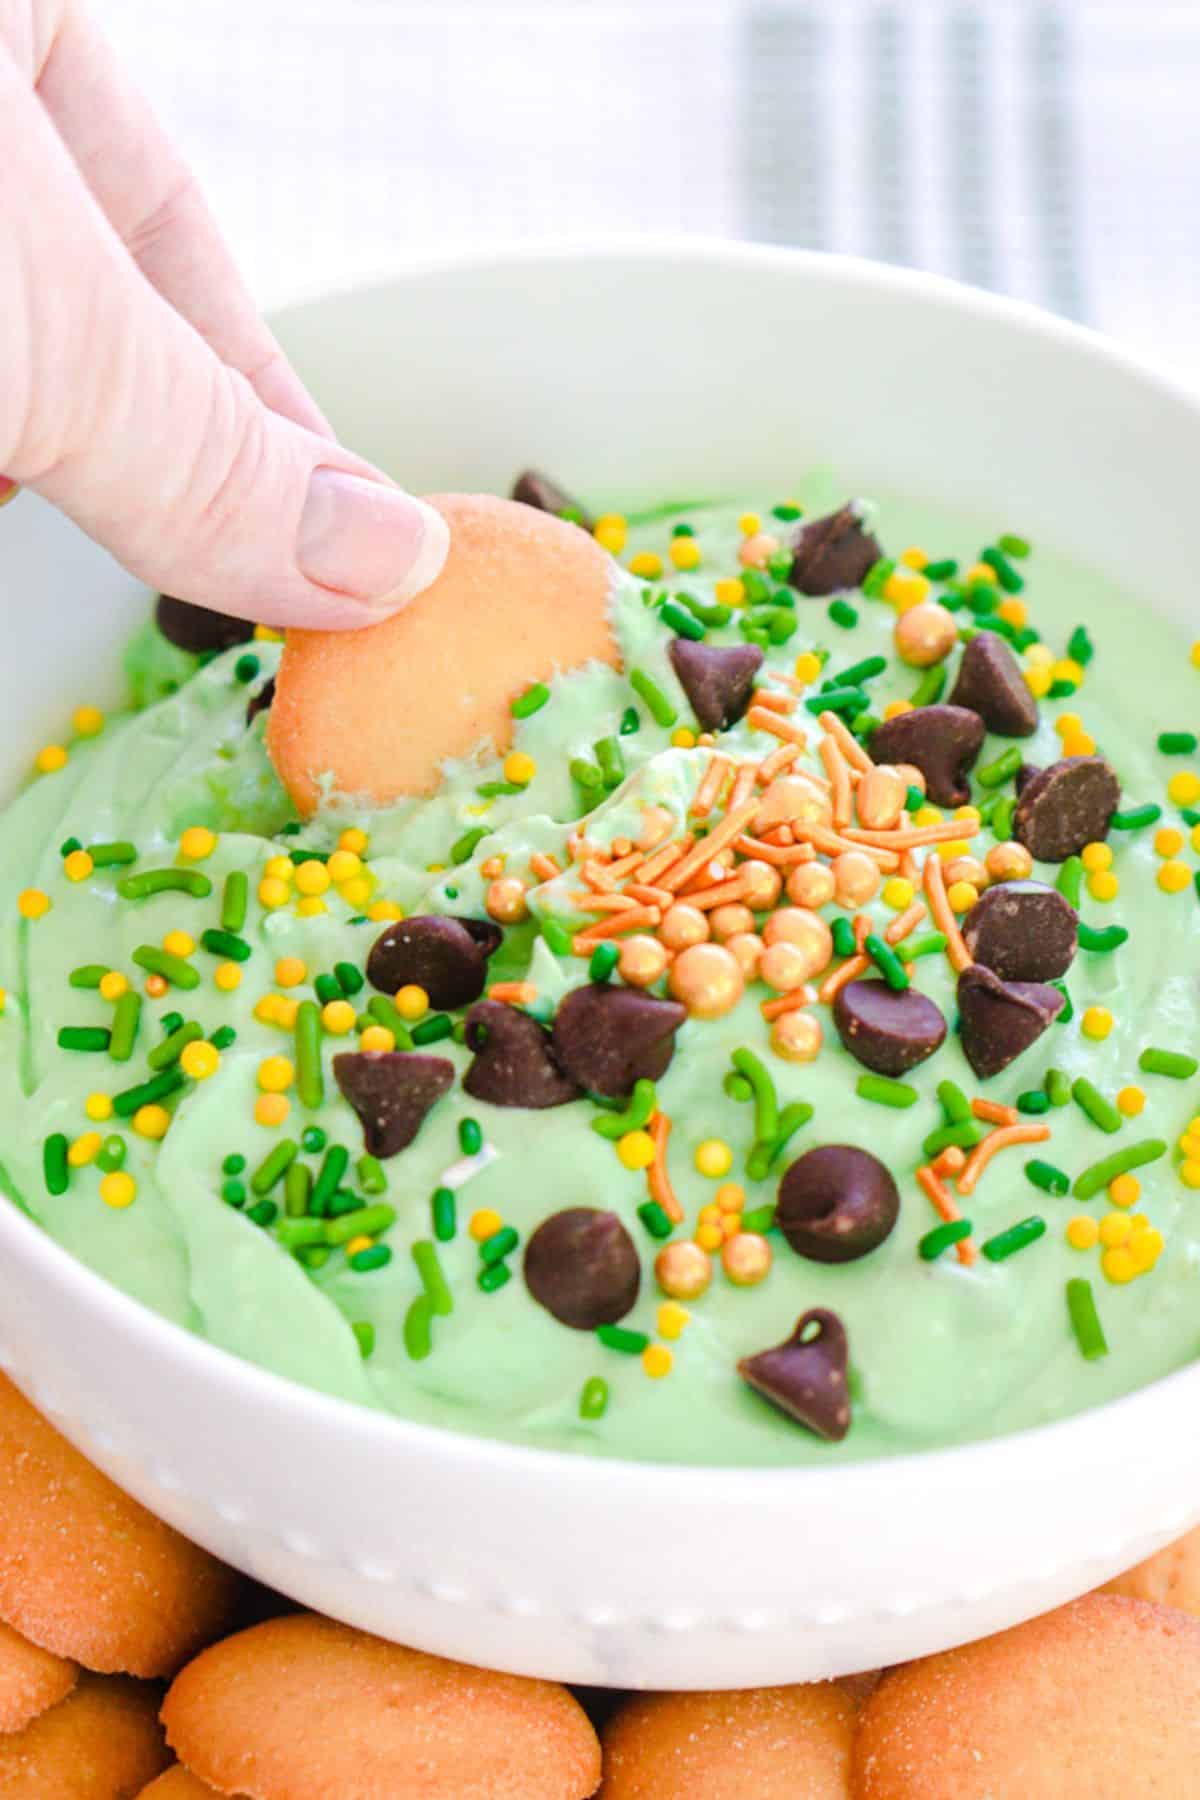 green dip with green and gold sprinkles and chocolate chips